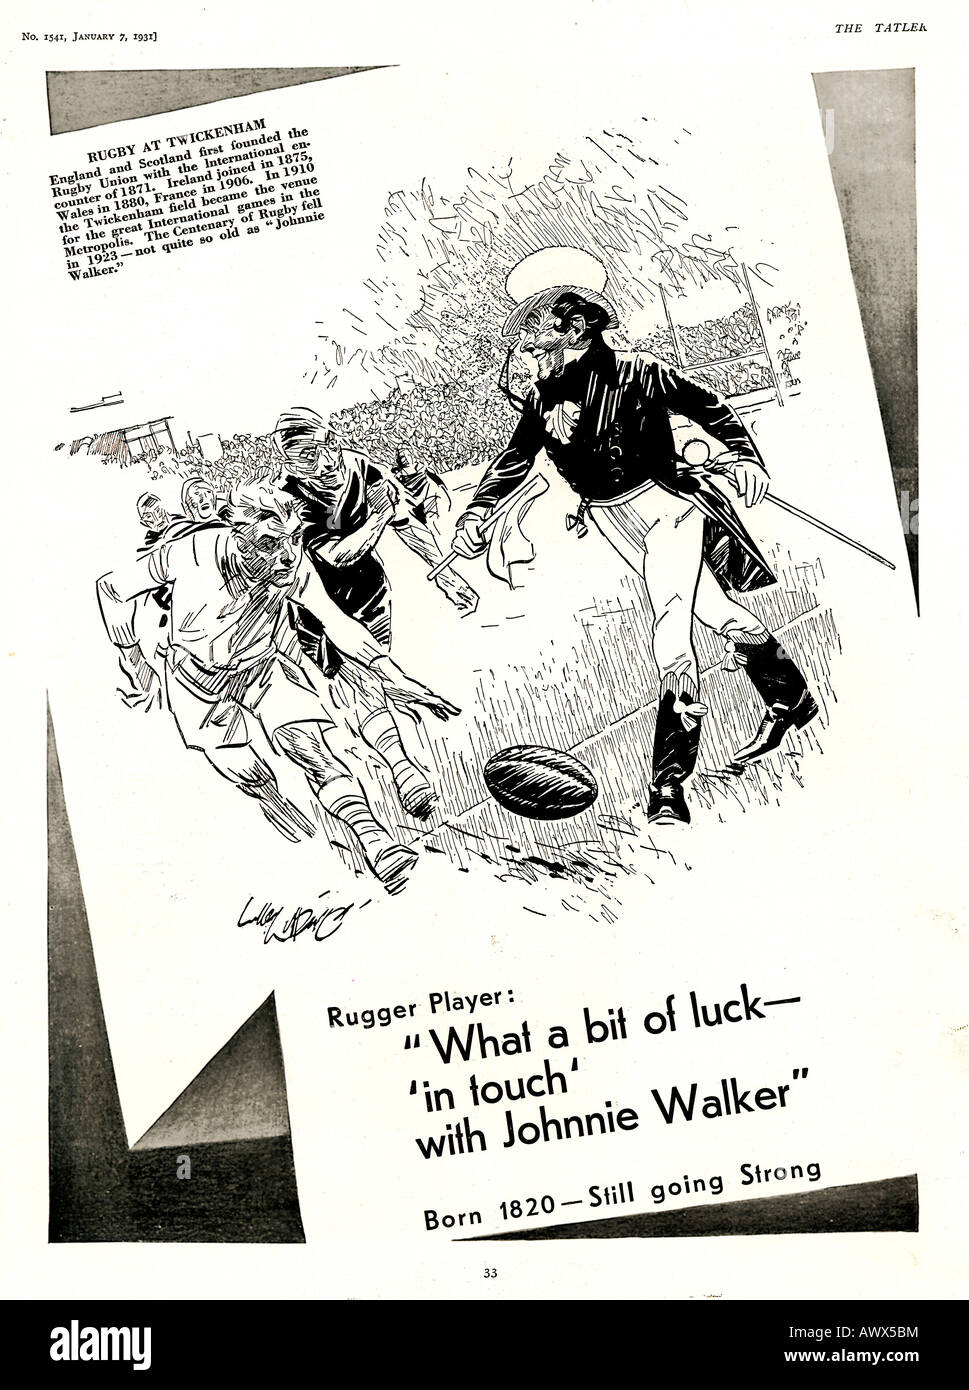 Johnny Walker at Twickenham 1931 advert for the Scotch Whisky with an illustration of rugby at HQ Stock Photo